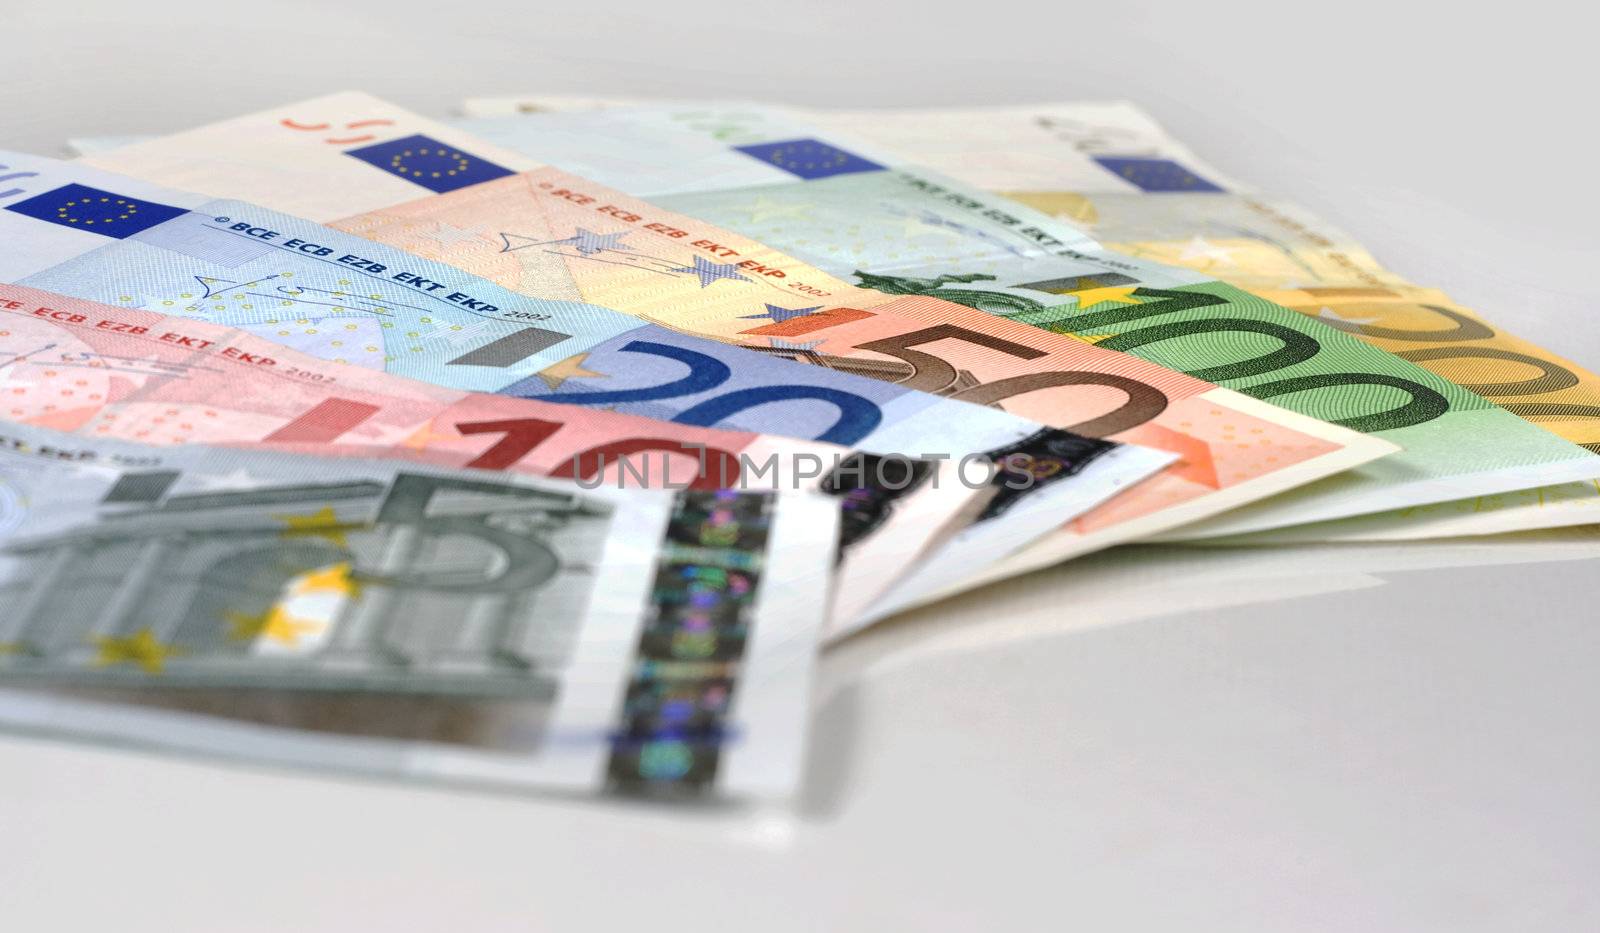 Simple shot of Euro banknotes of 200, 100, 50, 20, 10 Euros spread on a white table.

Studio shot.